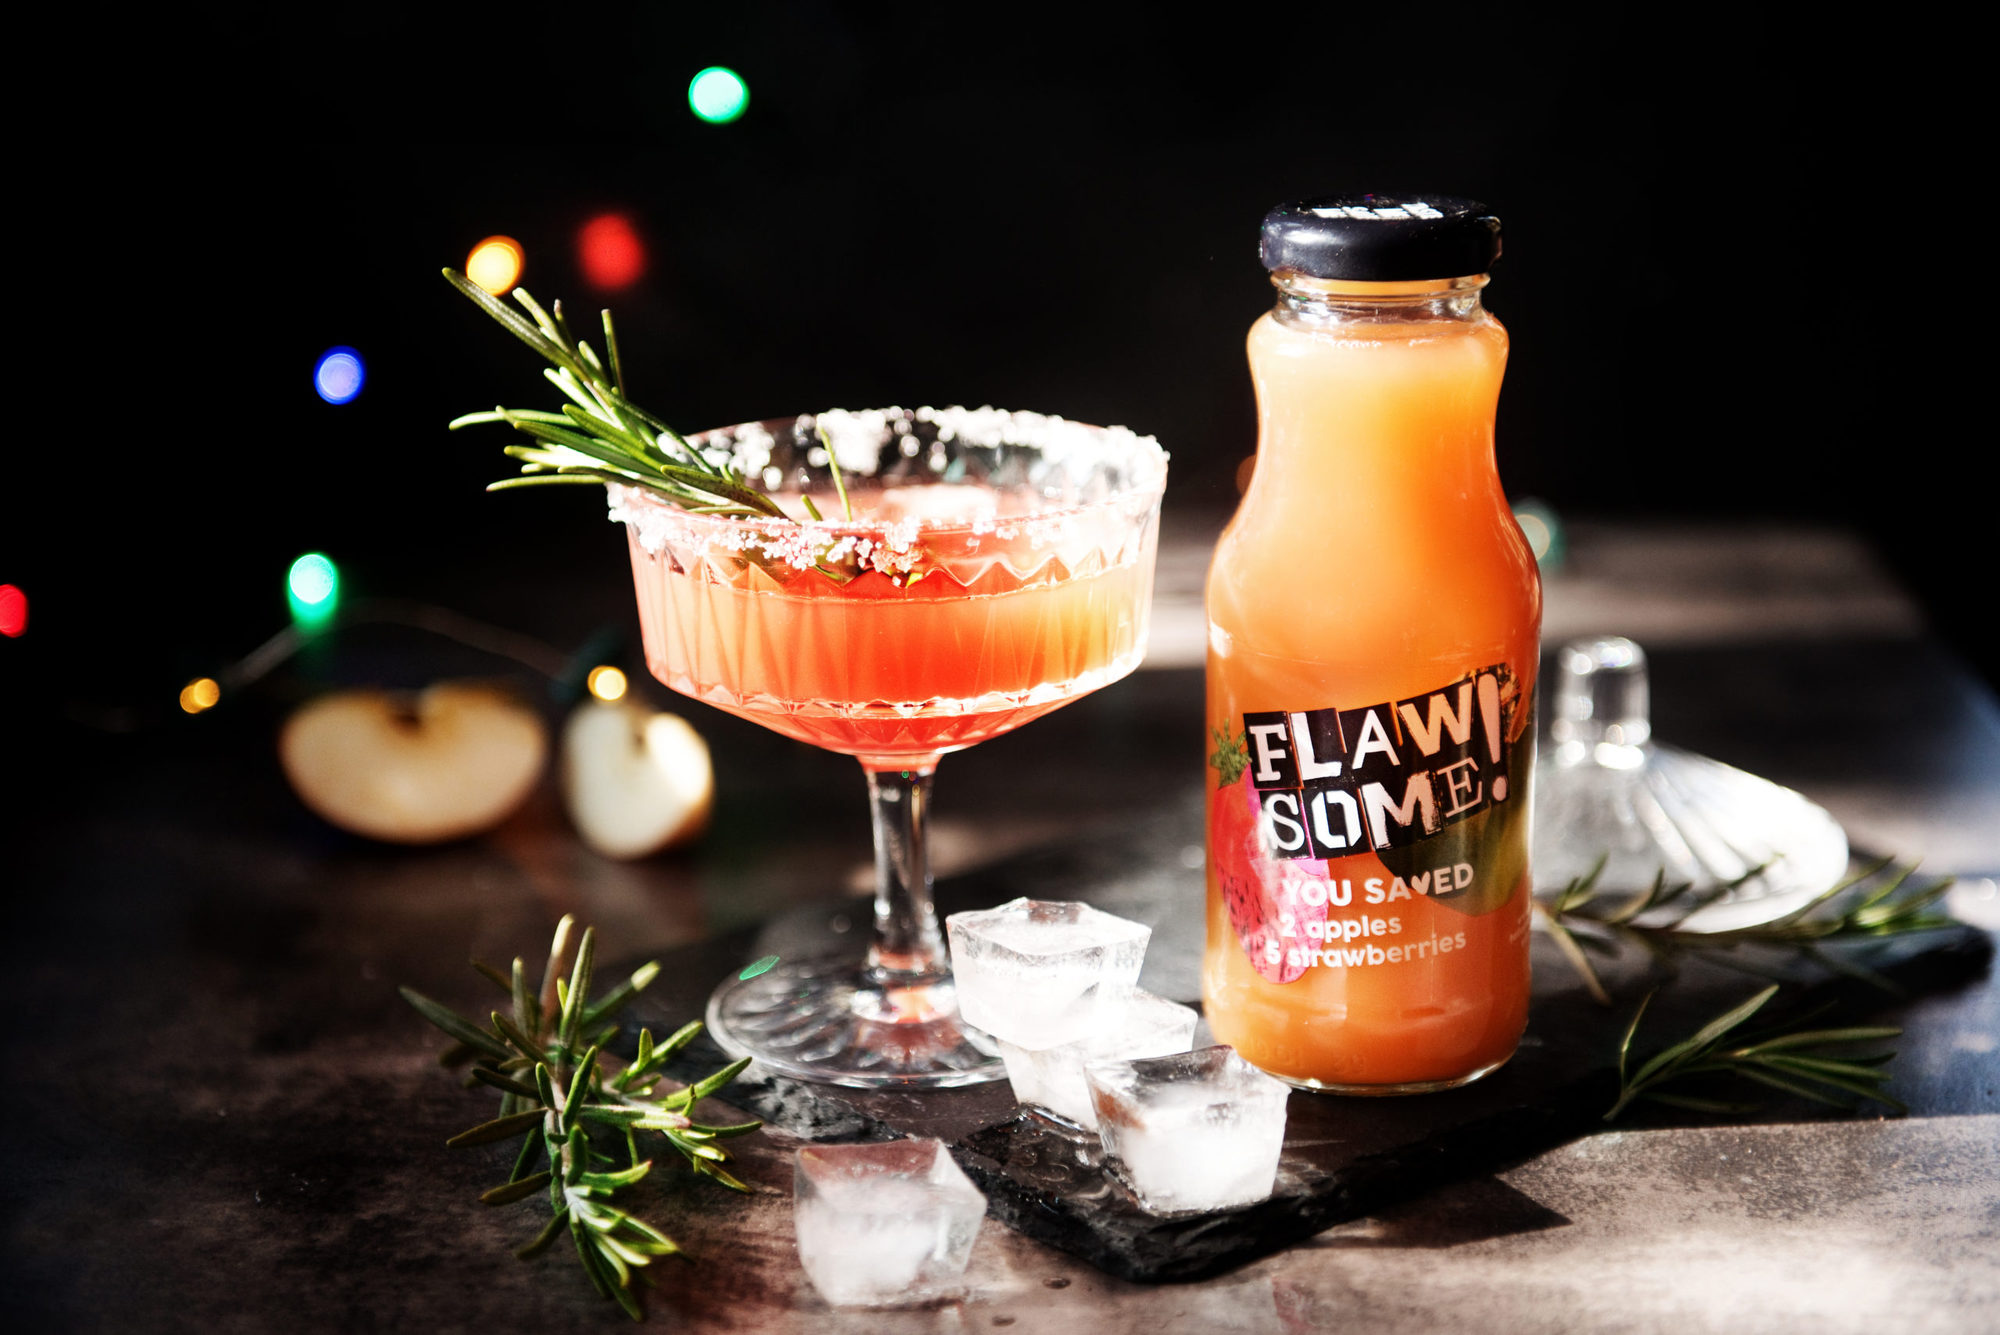 A Strawberry Sparkler cocktail next to a bottle of Flawsome! Drinks juice